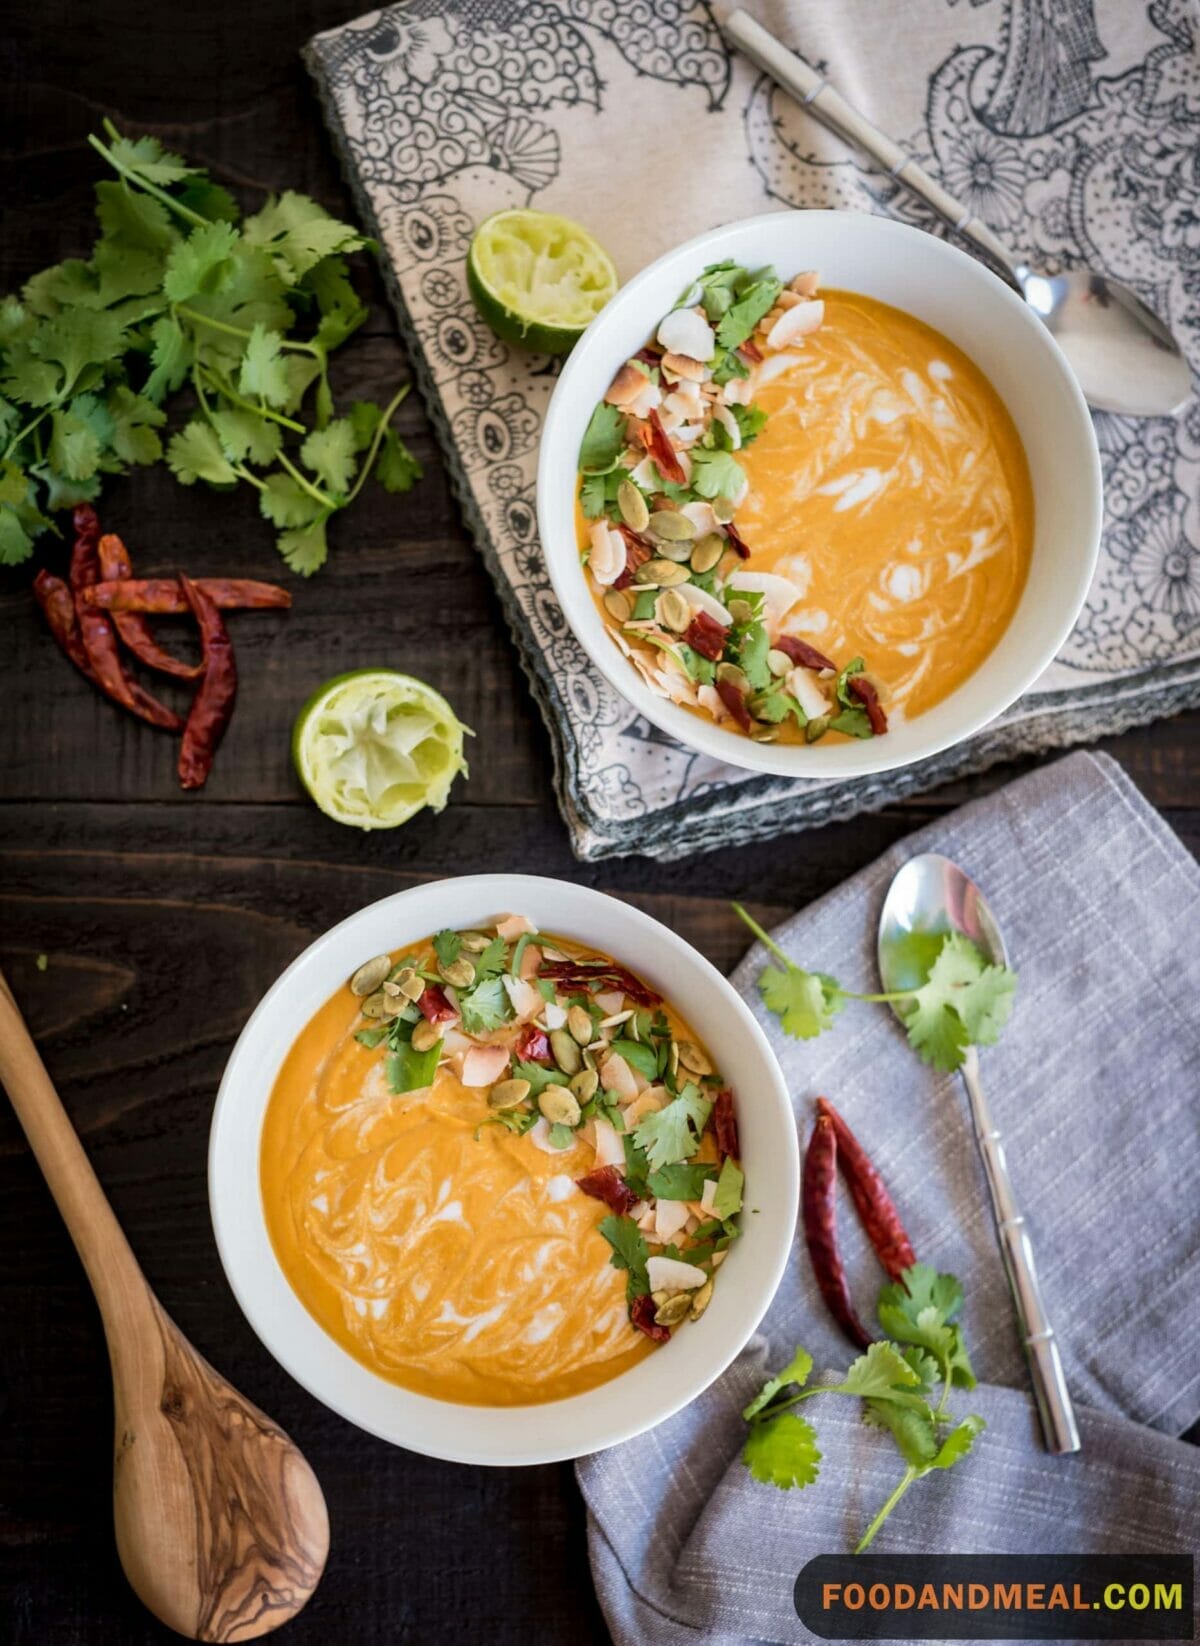 Spice Up Your Table With The Rich Hues Of Thai Pumpkin Coconut Curry